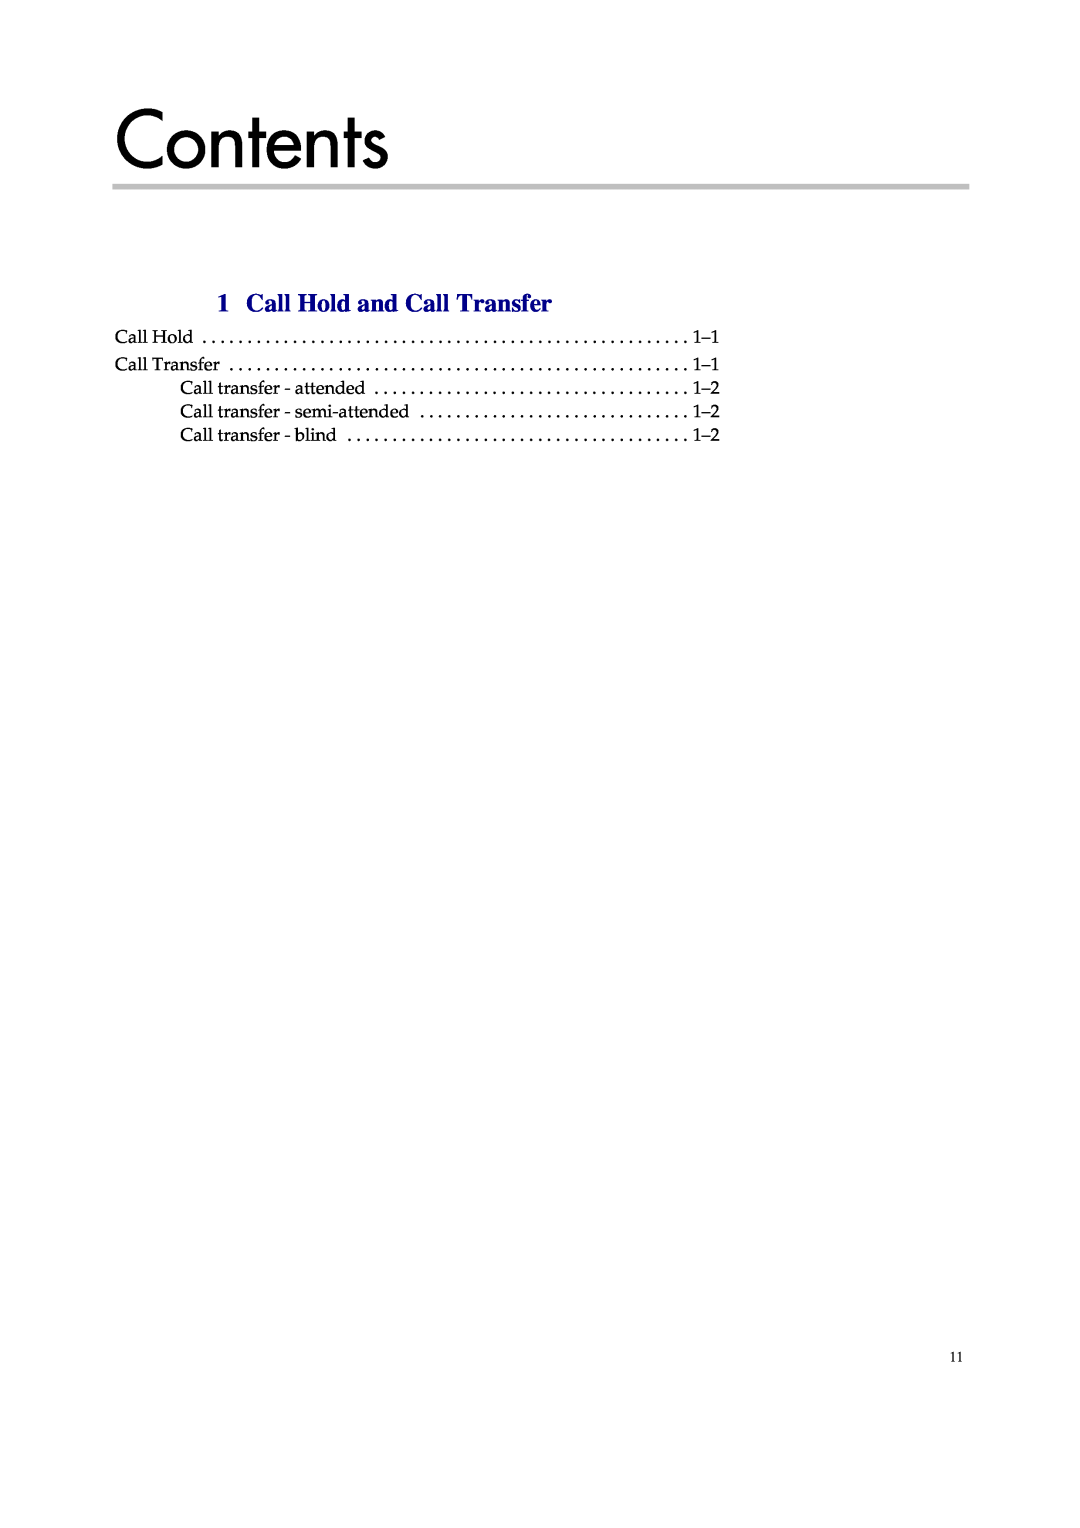 Polycom 1416 8711 manual Contents, Call Hold and Call Transfer 